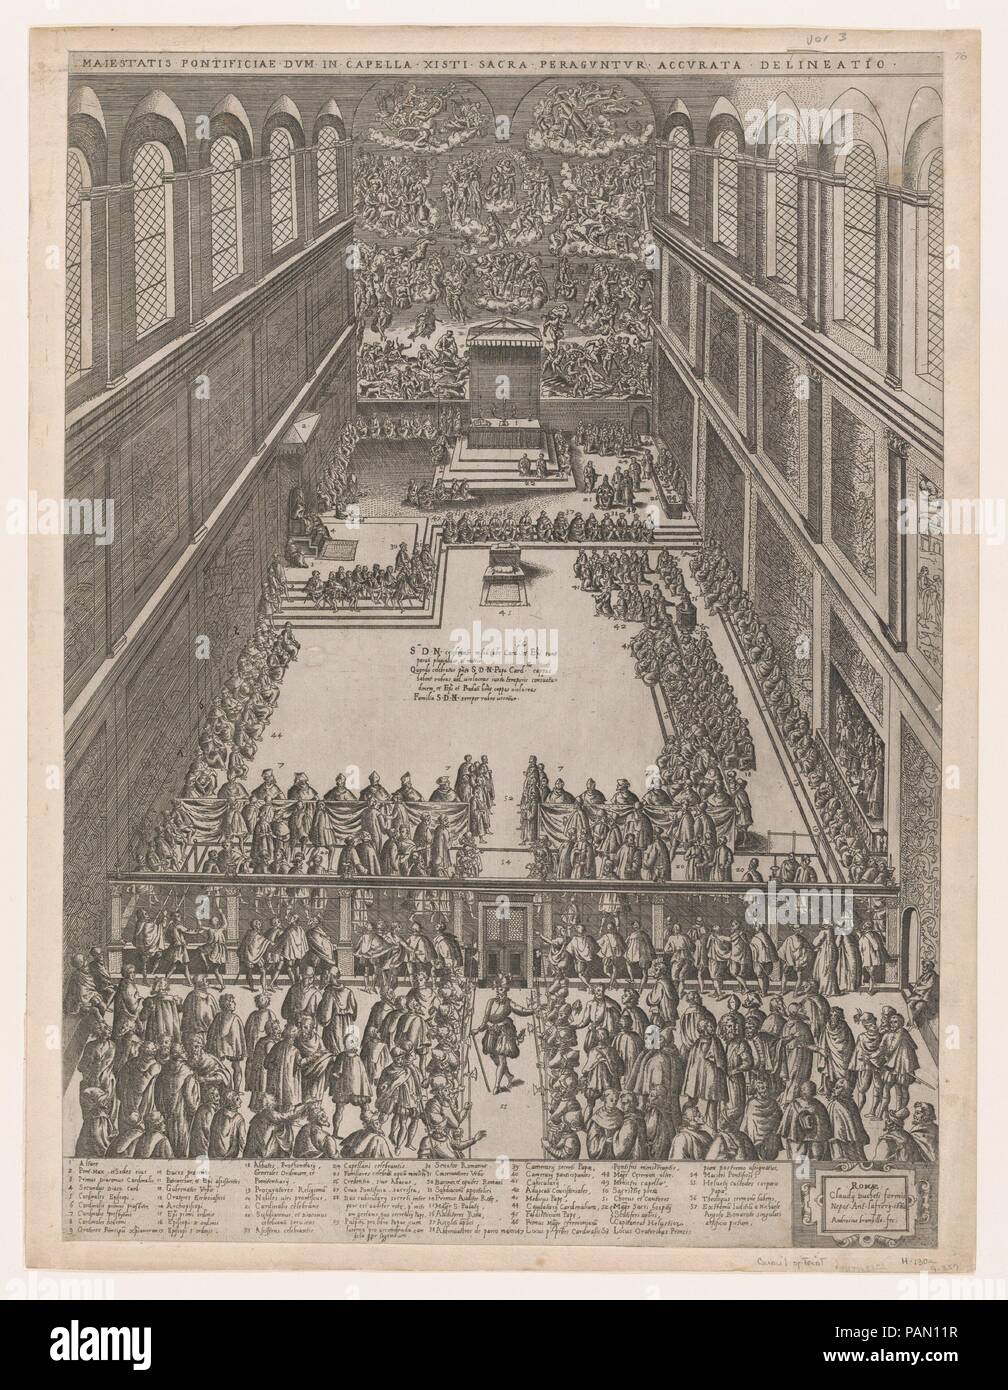 Speculum Romanae Magnificentiae: A Papal Gathering in the Sistine Chapel, Michelangelo's Last Judgement on the back wall; the crowd looks on through a screen. Artist: Giovanni Ambrogio Brambilla (Italian, active Rome, 1575-99). Dimensions: sheet: 21 1/16 x 15 9/16 in. (53.5 x 39.5 cm)  mount: 22 1/16 x 16 7/8 in. (56 x 42.8 cm). Publisher: Antonio Lafreri (French, Orgelet, Franche-Comte ca. 1512-1577 Rome). Series/Portfolio: Speculum Romanae Magnificentiae. Date: 1582.  This print comes from the museum's copy of the Speculum Romanae Magnificentiae (The Mirror of Roman Magnificence) The Speculu Stock Photo